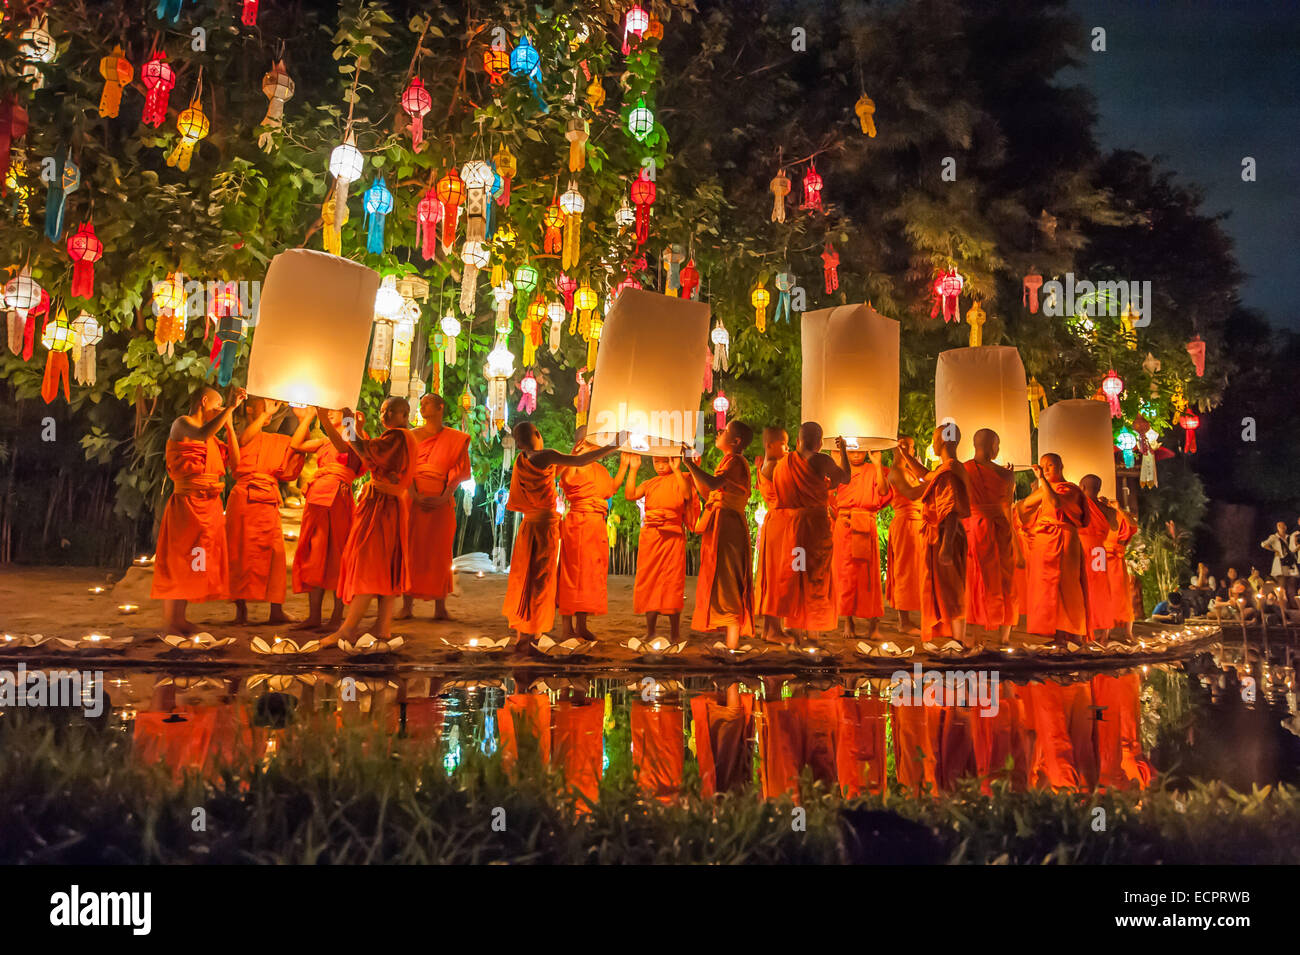 Buddhist monks releasing Chinese paper lanterns at the loy krathong festival of light, Chiang Mai Stock Photo